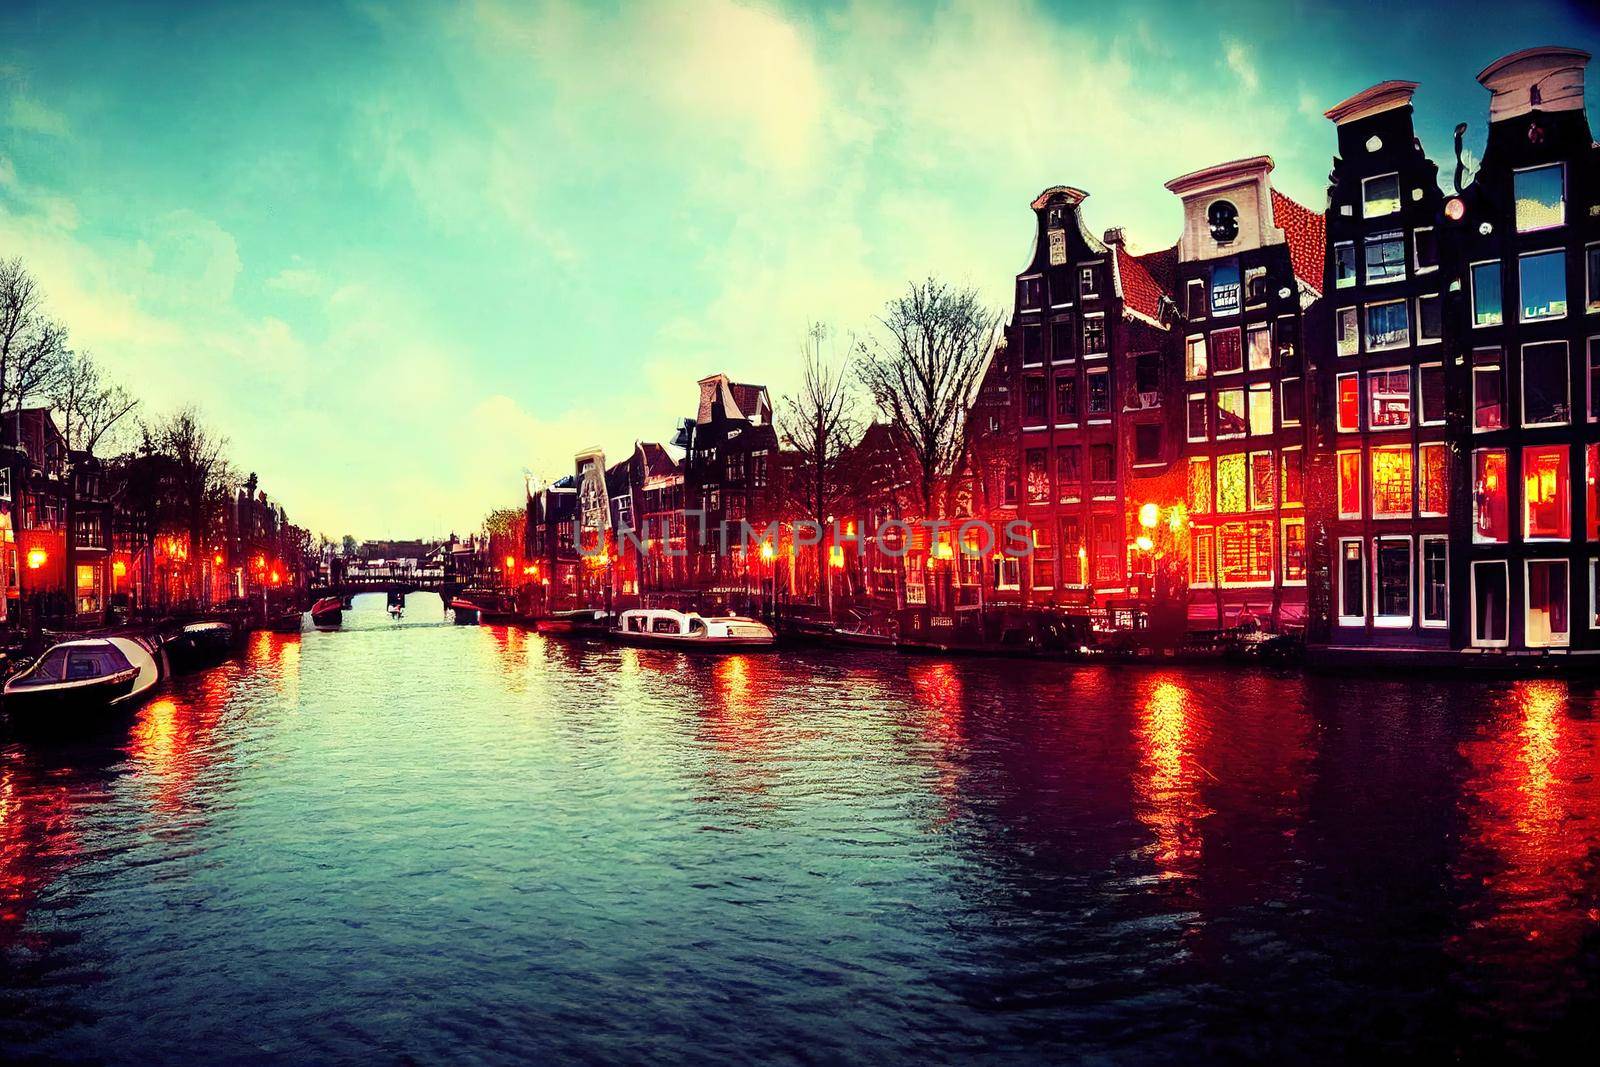 anime Canals of Amsterdam Amsterdam is the capital and most populous city of the Netherlands , Anime style U1 1 by 2ragon